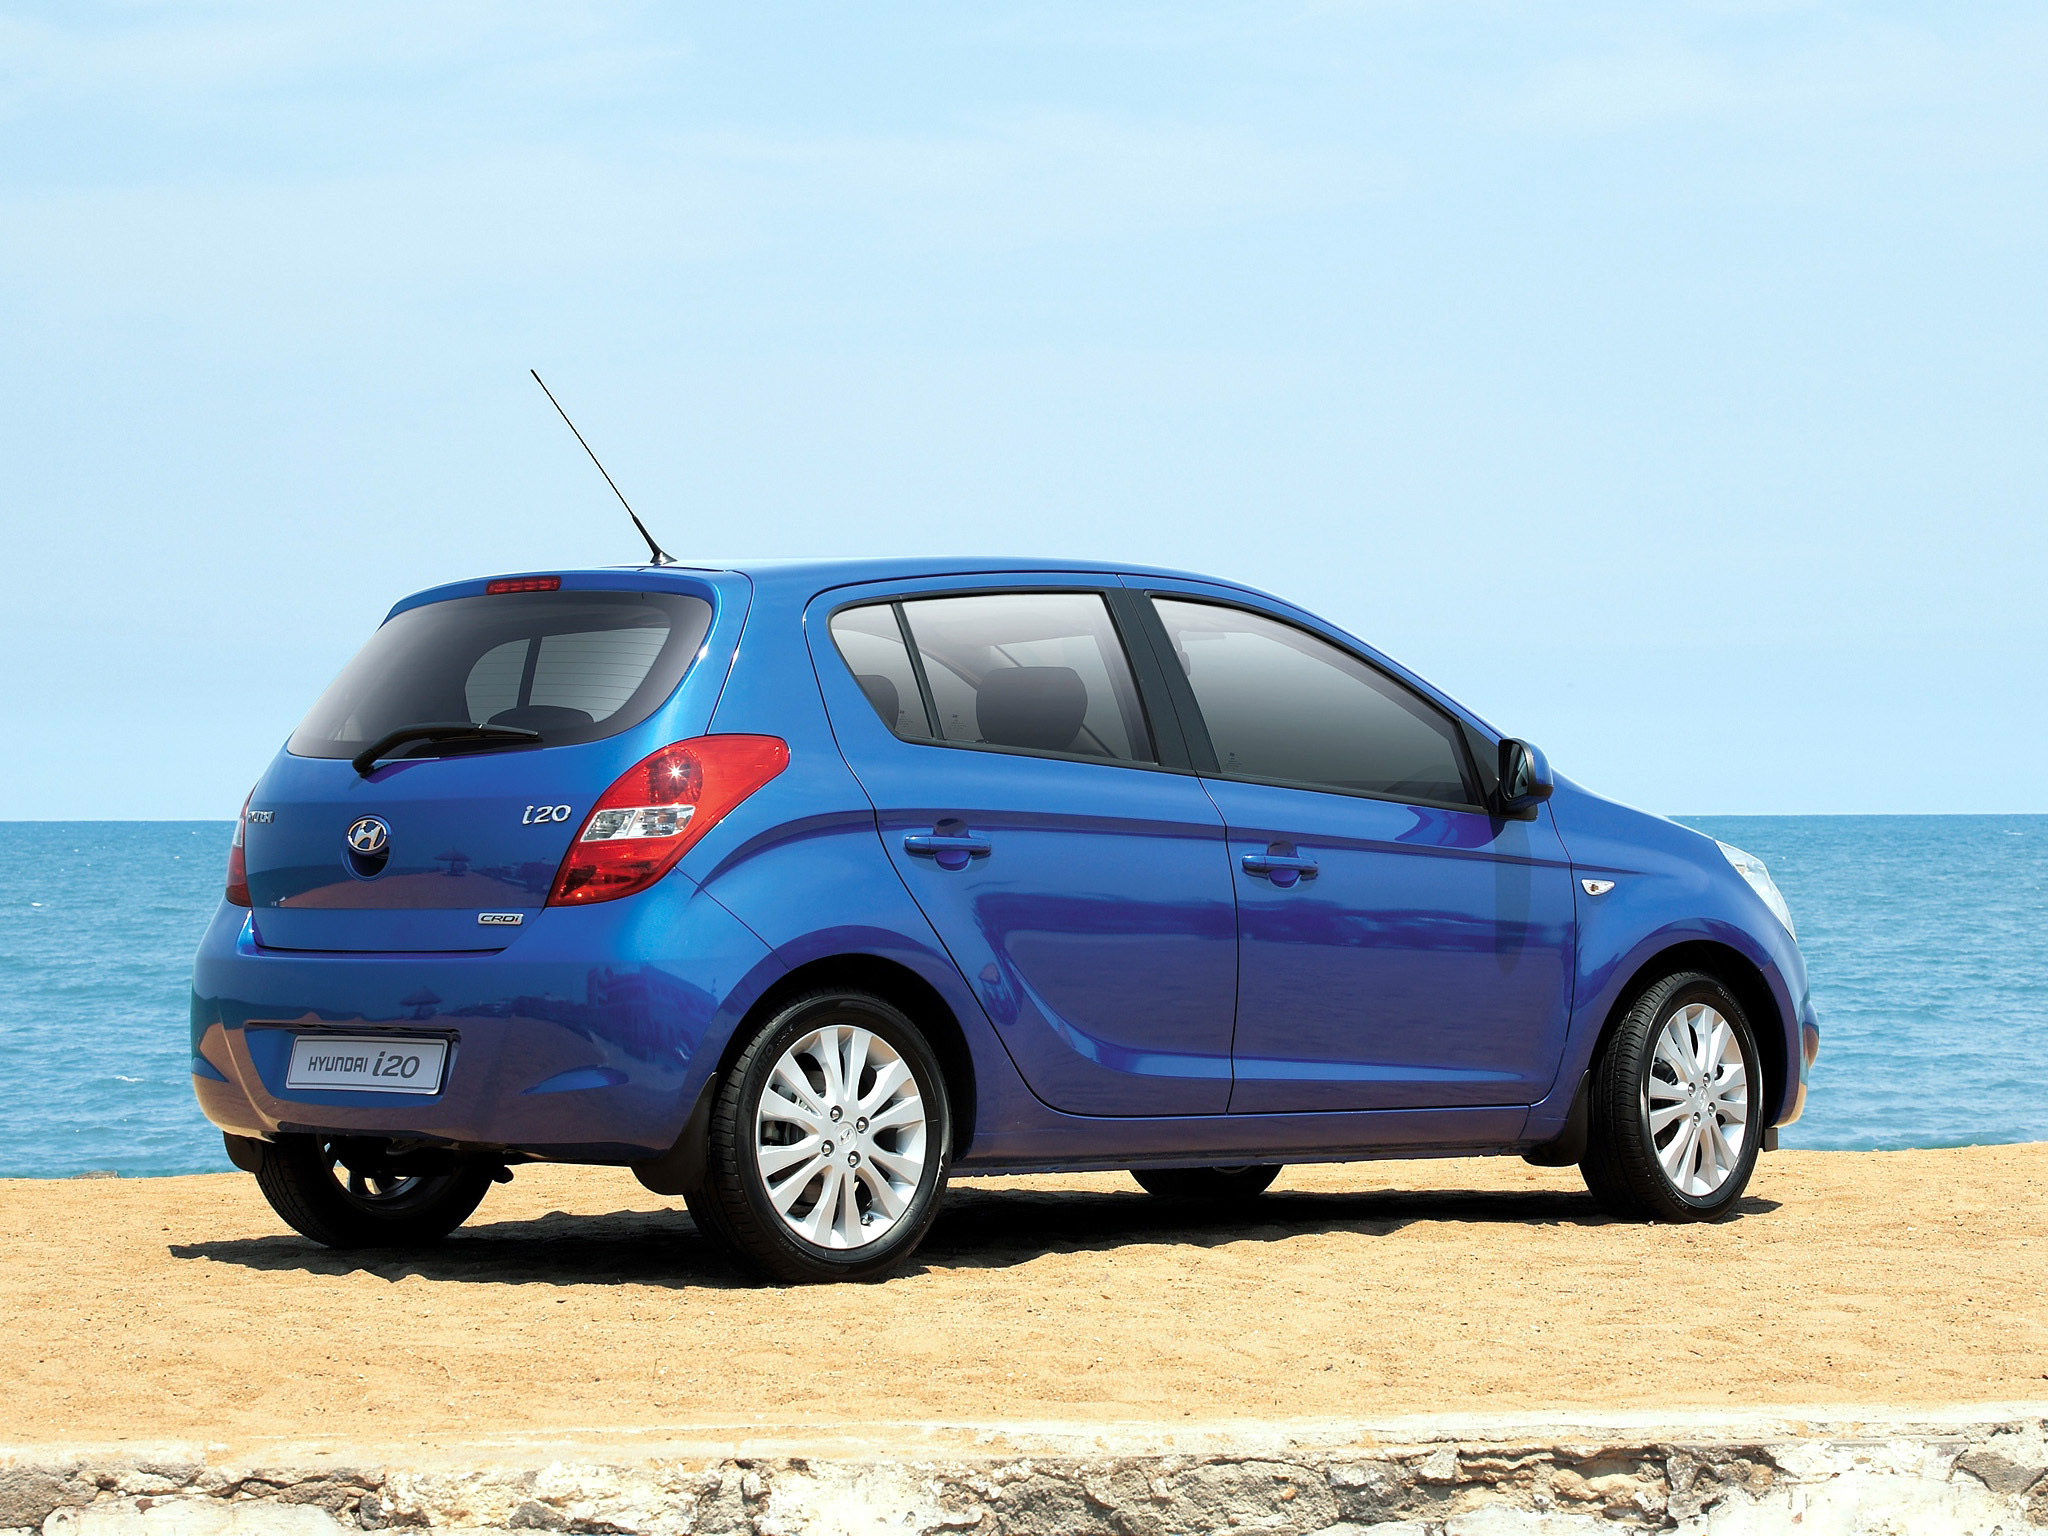 Car in pictures car photo gallery » Hyundai i20 2008